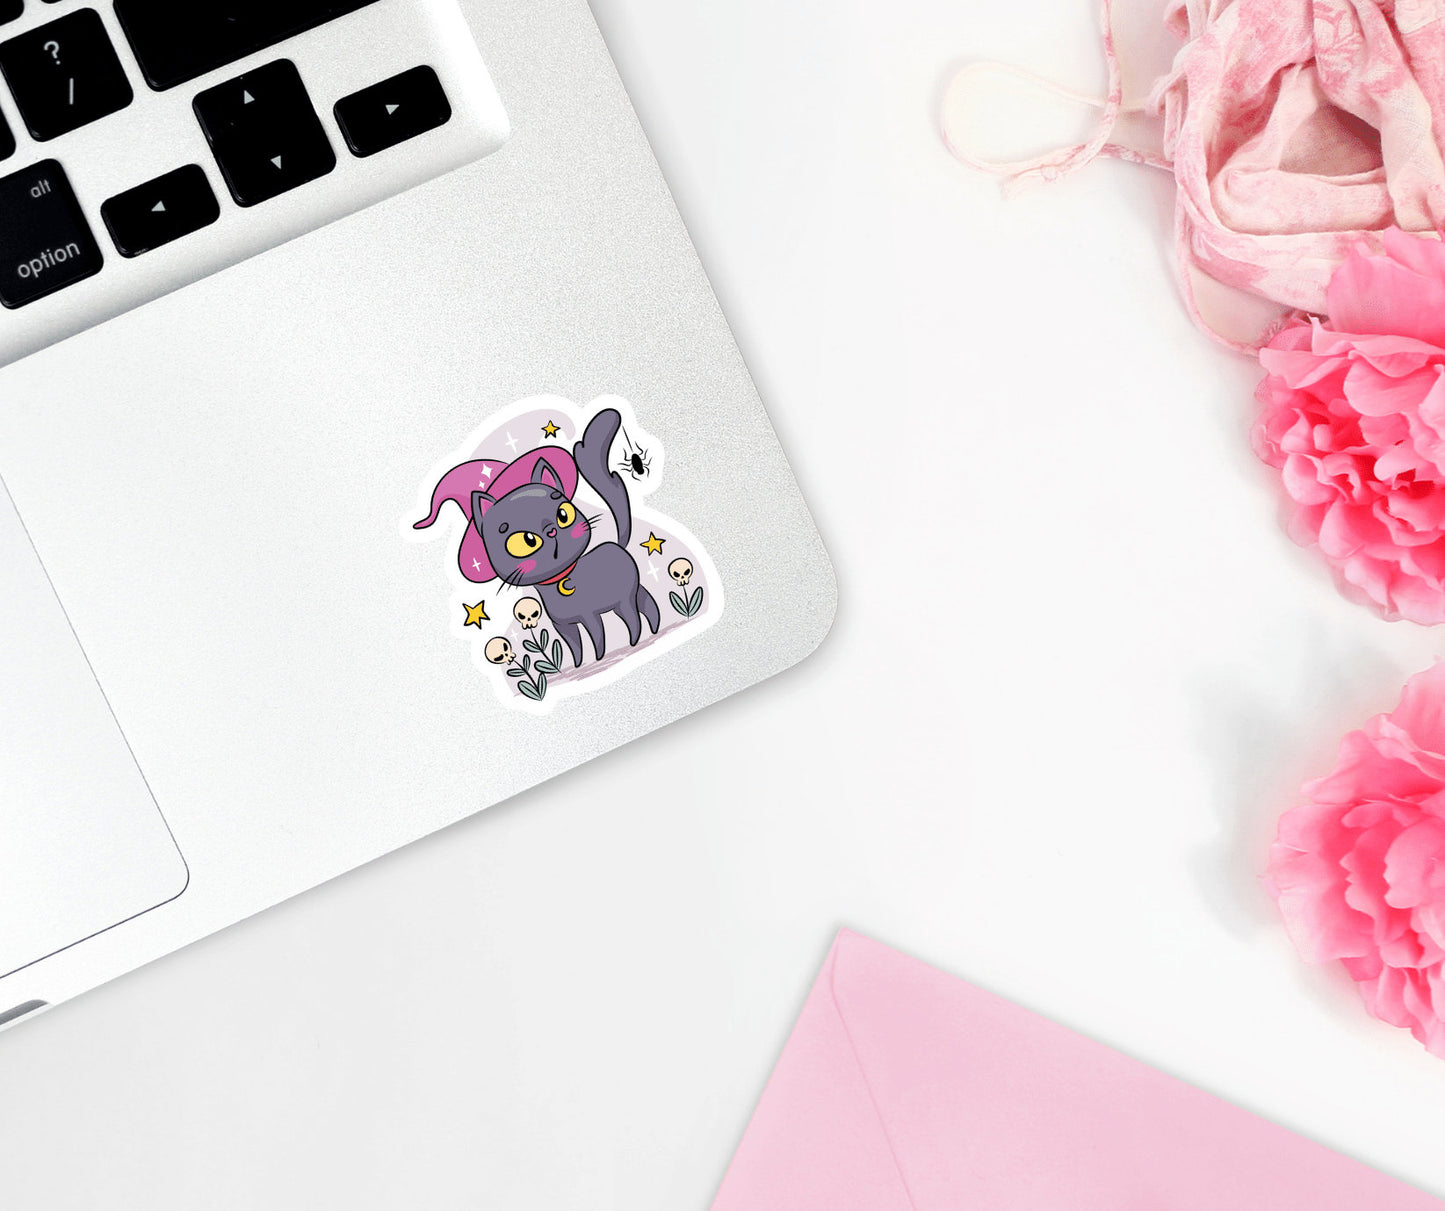 Halloween Cat Stickers | Black Cat | 9 Pack Glossy Vinyl Water Resistant Laptop Sticker | Kawaii Stickers | Black Cat Decal | Anime Stickers